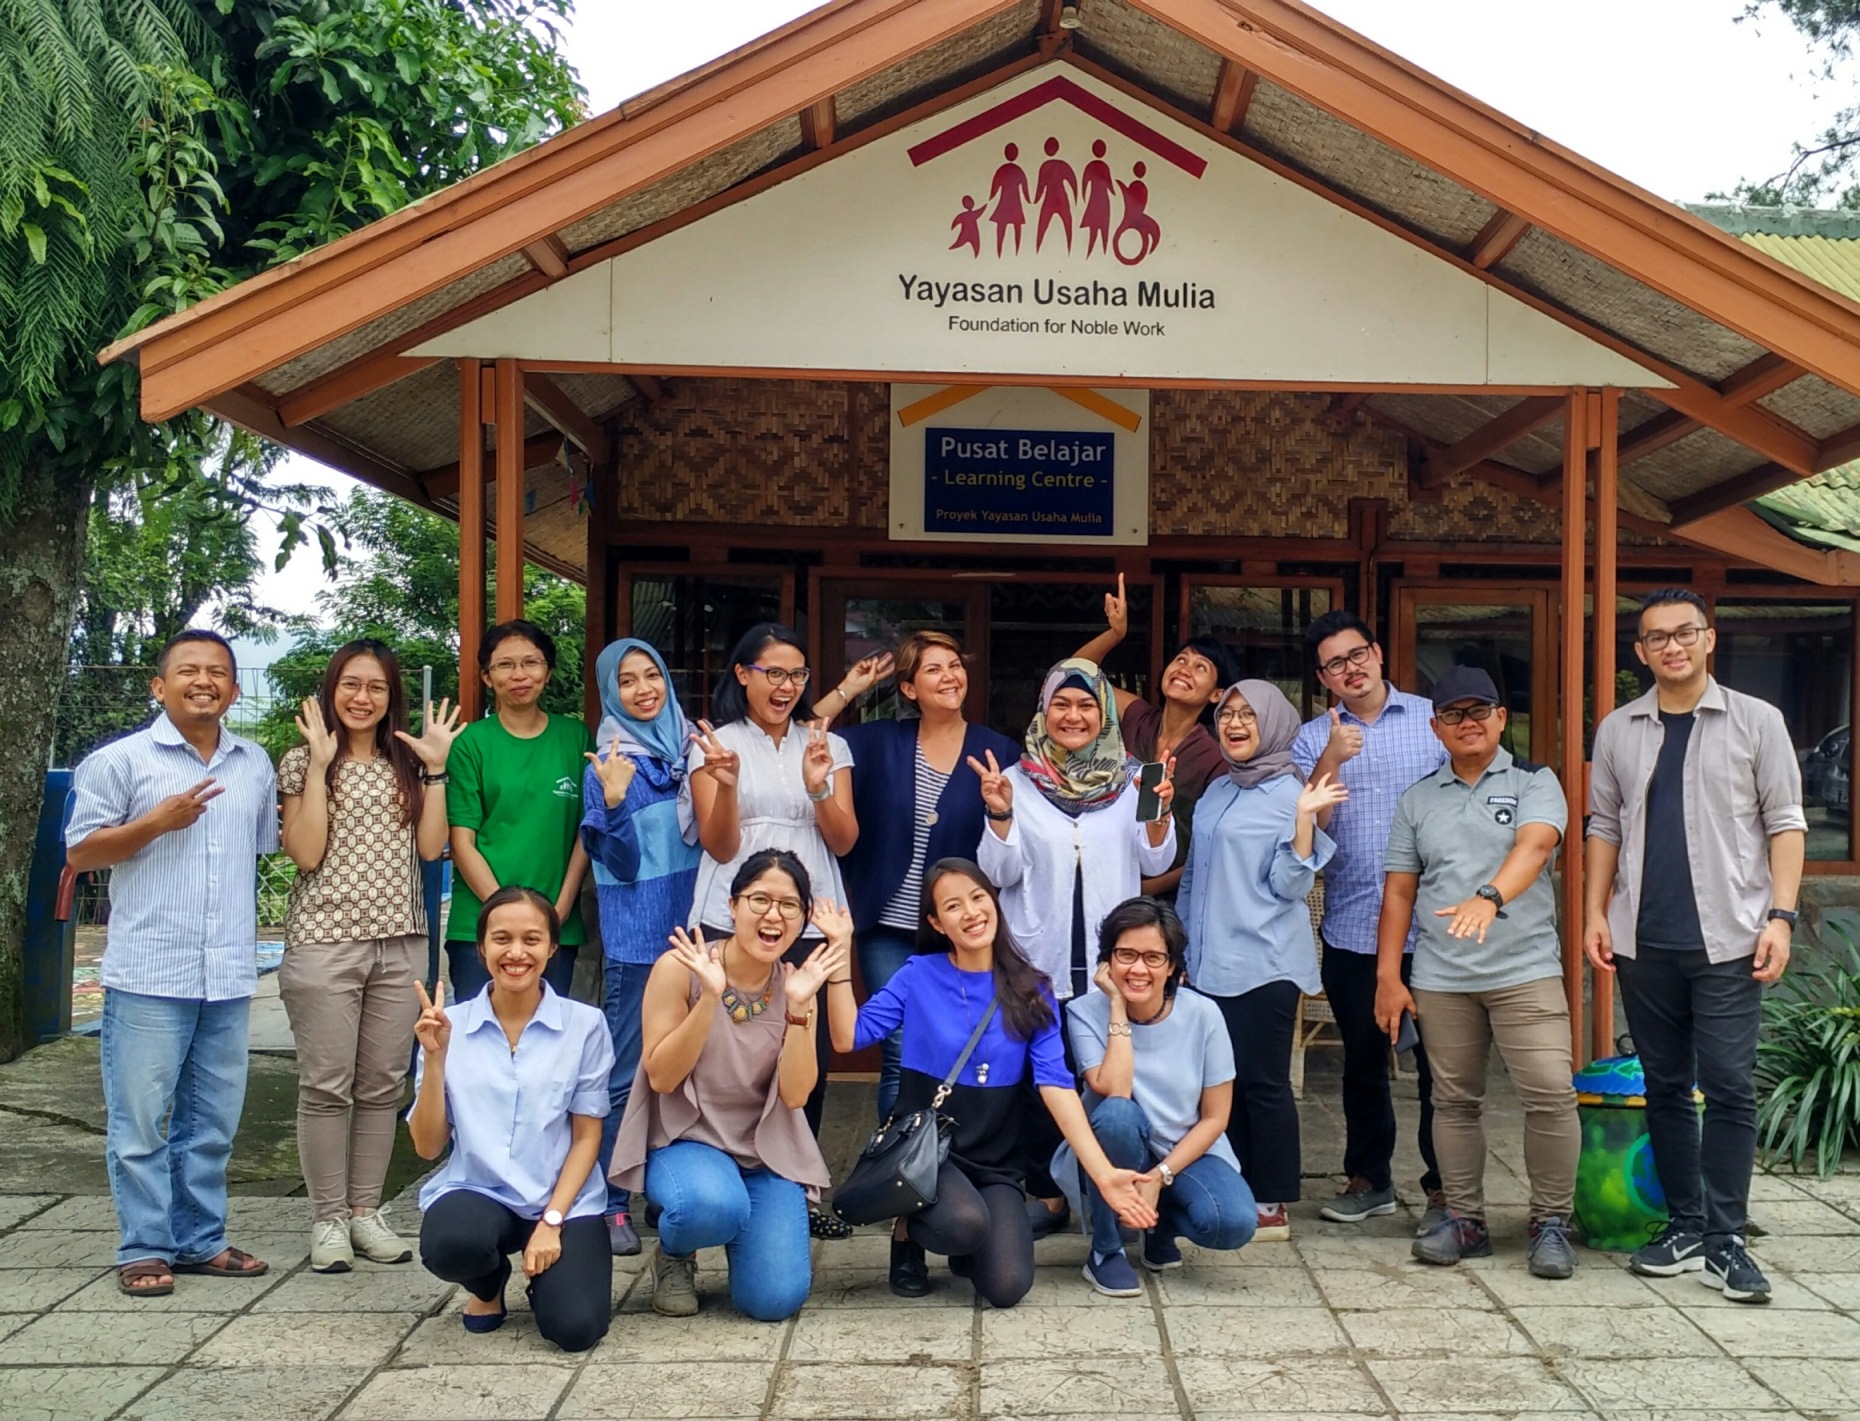 Yayasan Usaha Mulia (YUM) recently hosted a visit from Asia Philanthropy Circle (APC) and like-minded education enthusiasts to our community development centre on December 12th.     